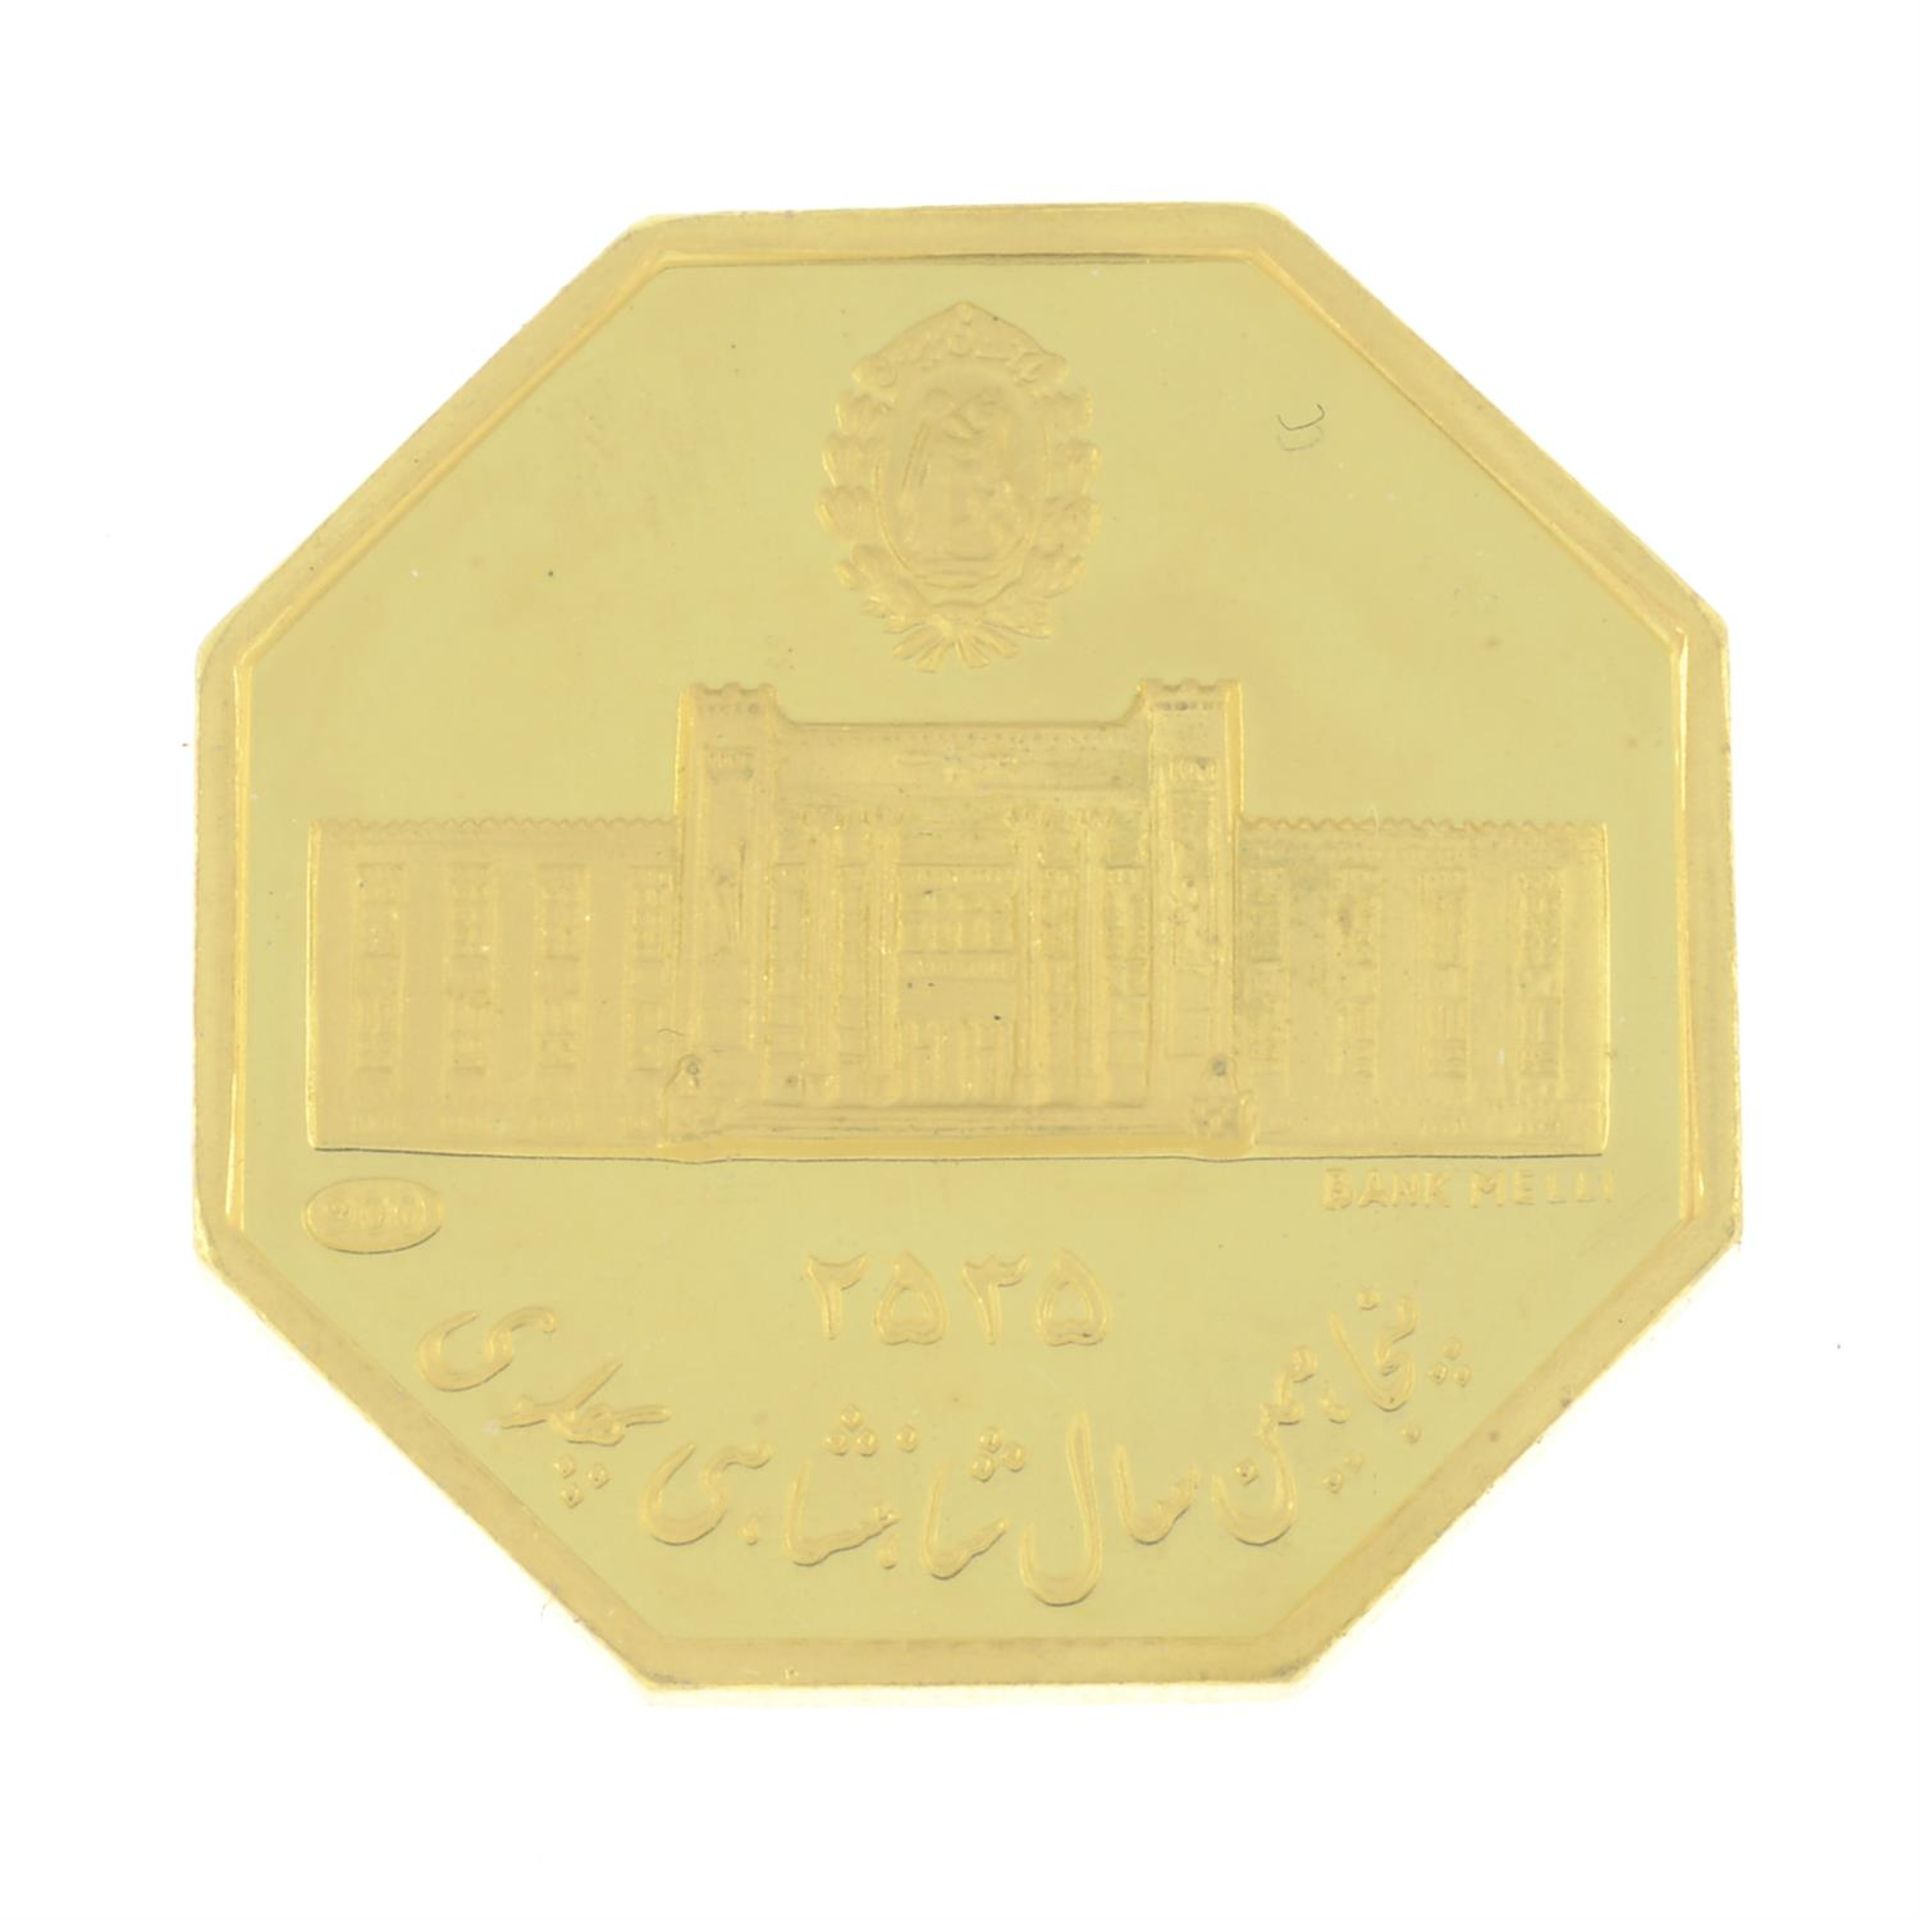 Iran, National Bank of Iran, Golden Jubilee, octagonal proof gold medal dated MS 2535 (1976). - Image 2 of 2